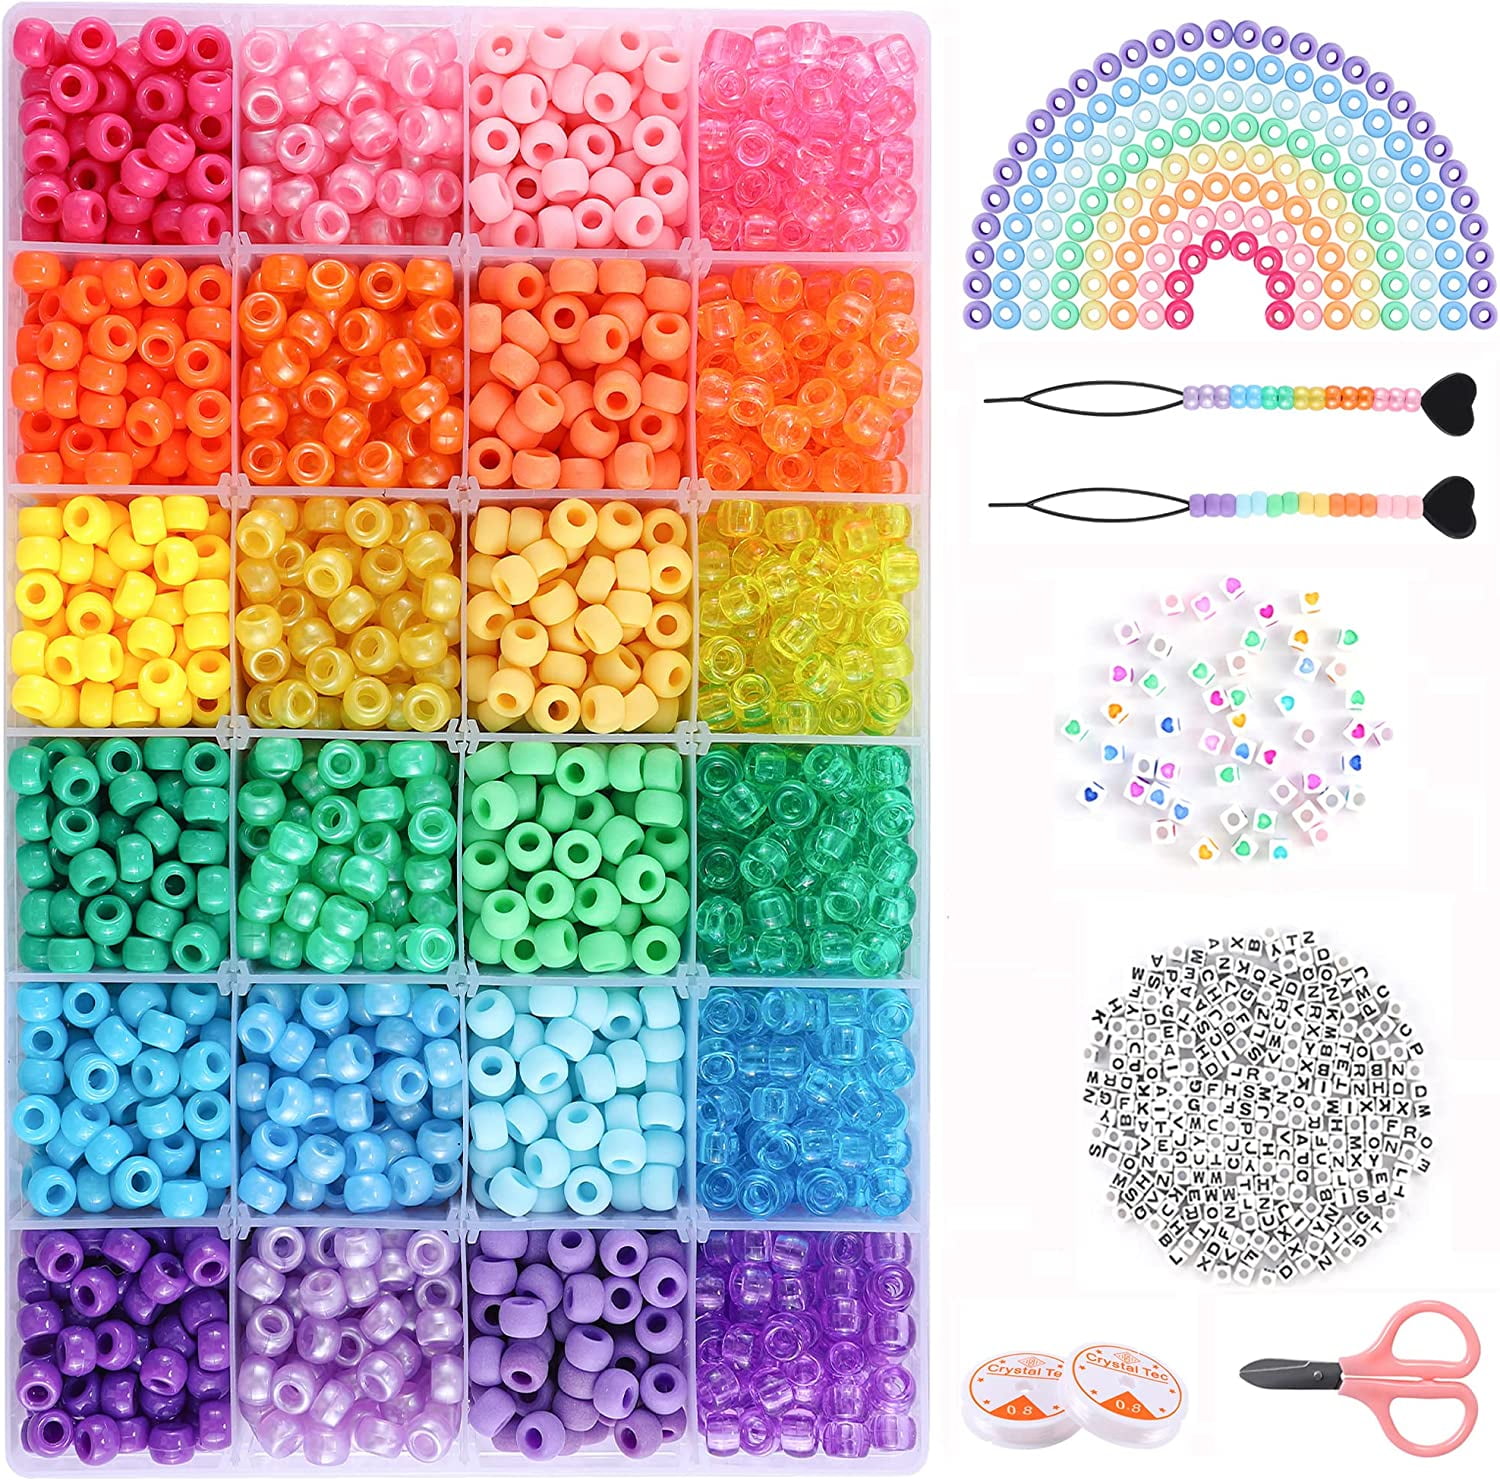 Aaomassr Clay Flat Beads for Jewelry Bracelet Making, 6mm 20 Colors Bracelet Making Kit, Polymer Heishi Flat Beads, Smiley Face Letter Bead Arts and Crafts Kit